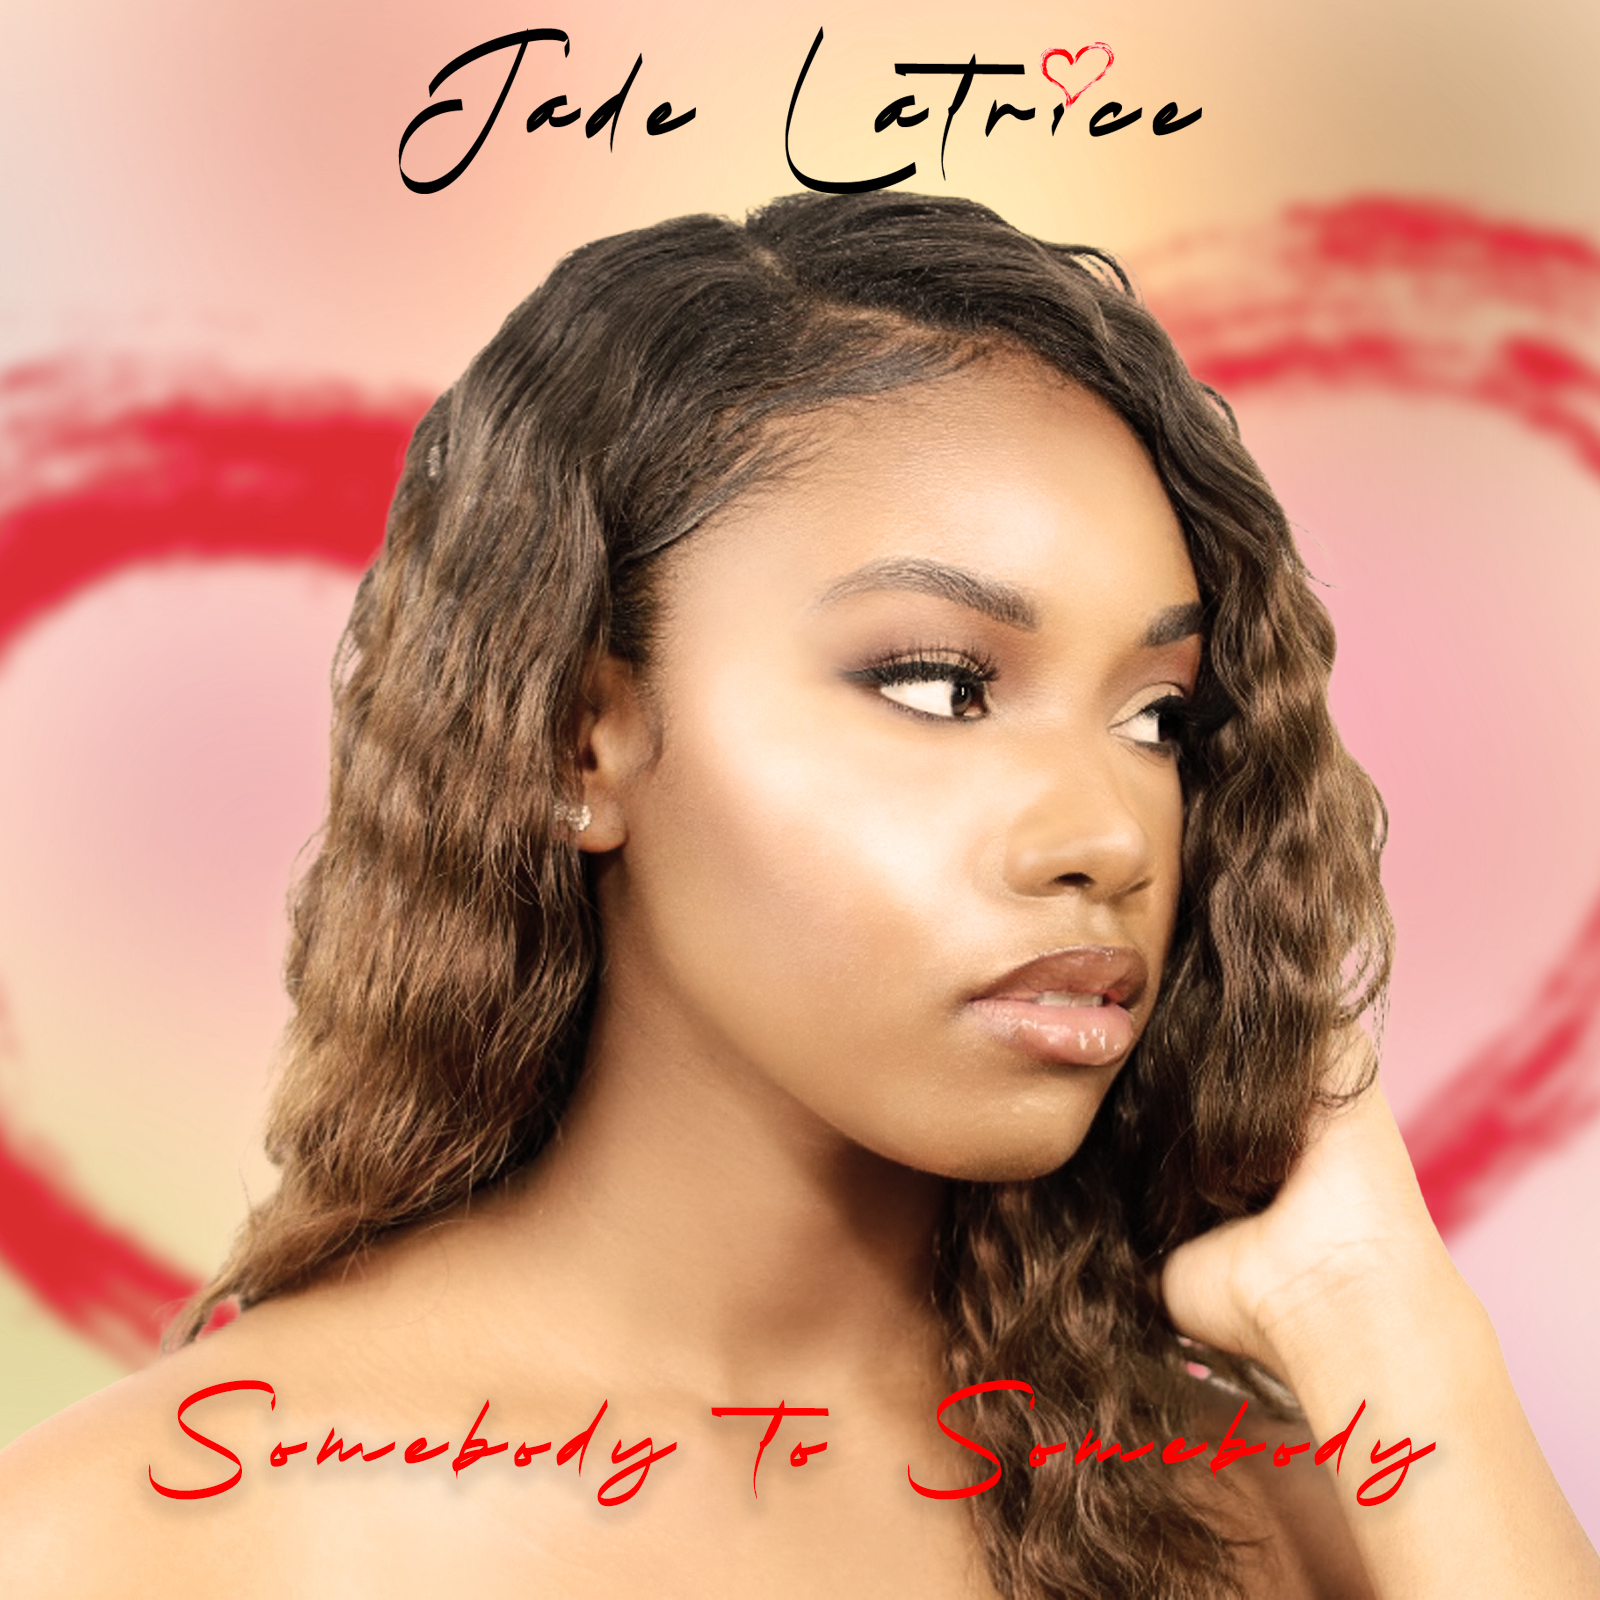 The new single ‘Somebody To Somebody’ from ‘Jade Latrice’ is soulful to the core, with lyrics that exert an air of relatability